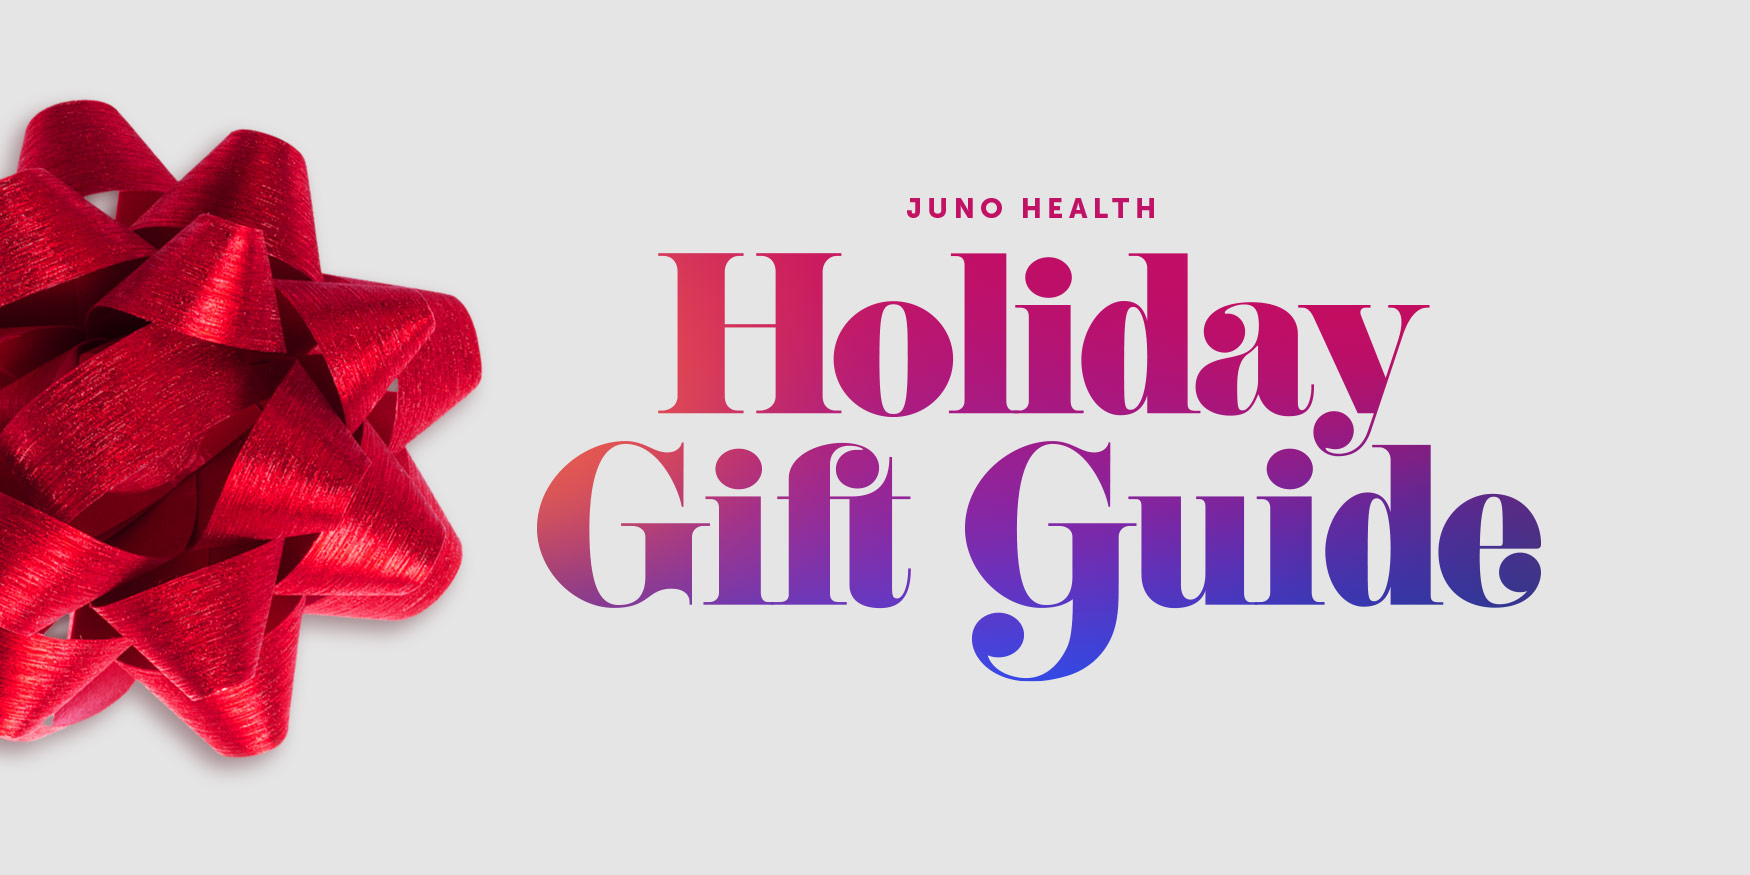 38 Best Gifts for Nurses and Healthcare Workers in 2021